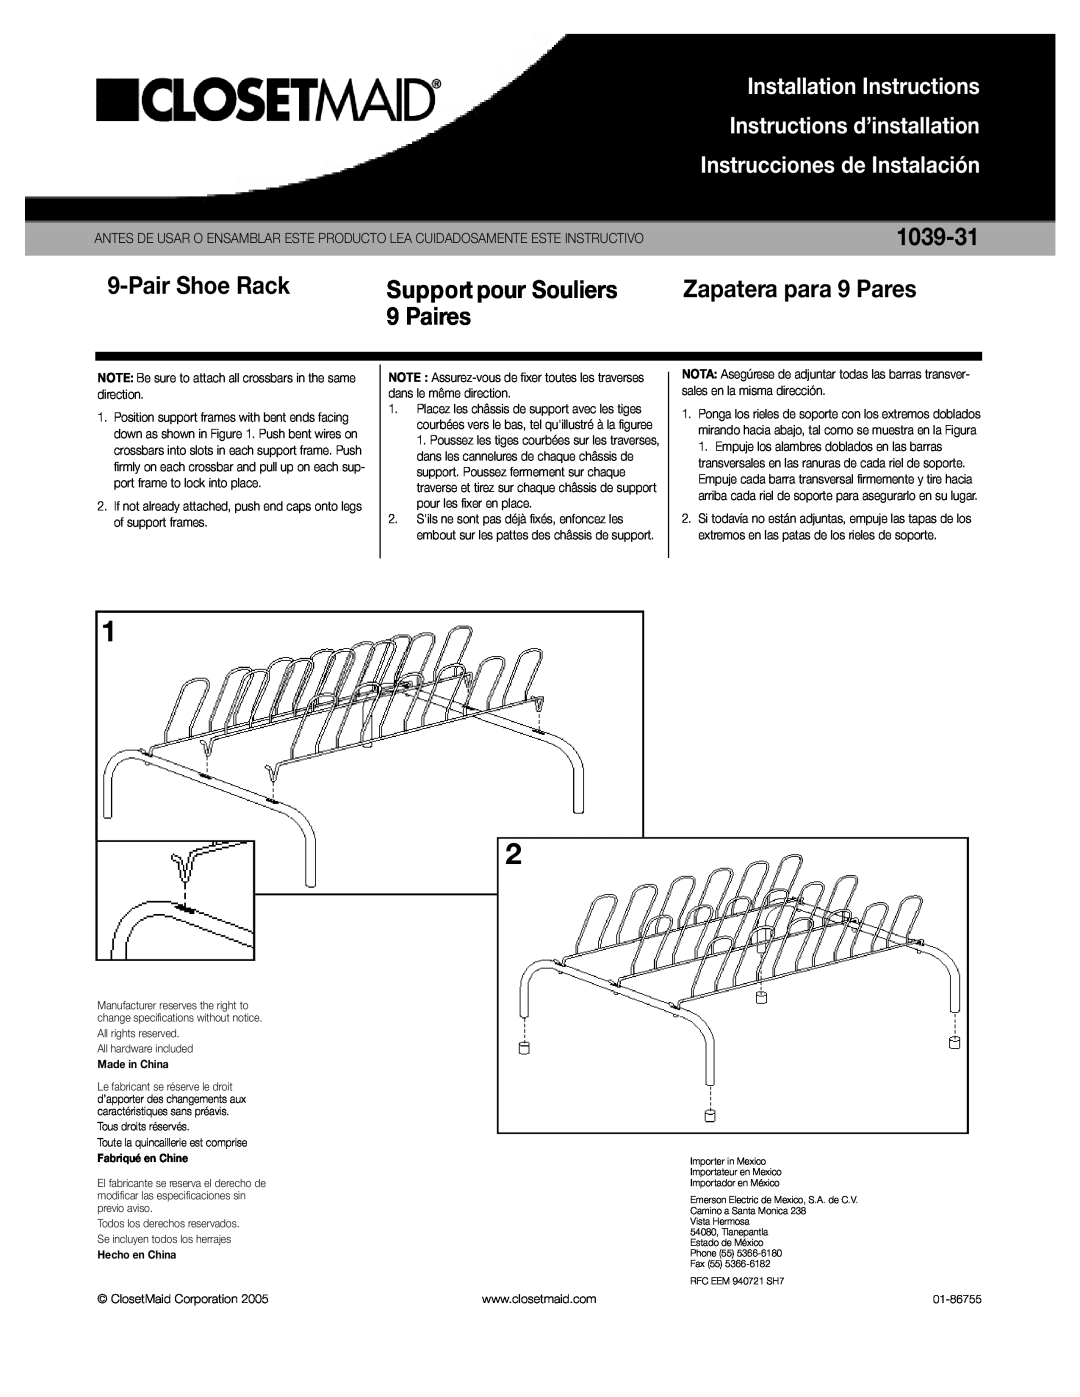 Closet Maid 1039-31 installation instructions PairShoe Rack, Support pour Souliers, Paire s, Installation Instructions 